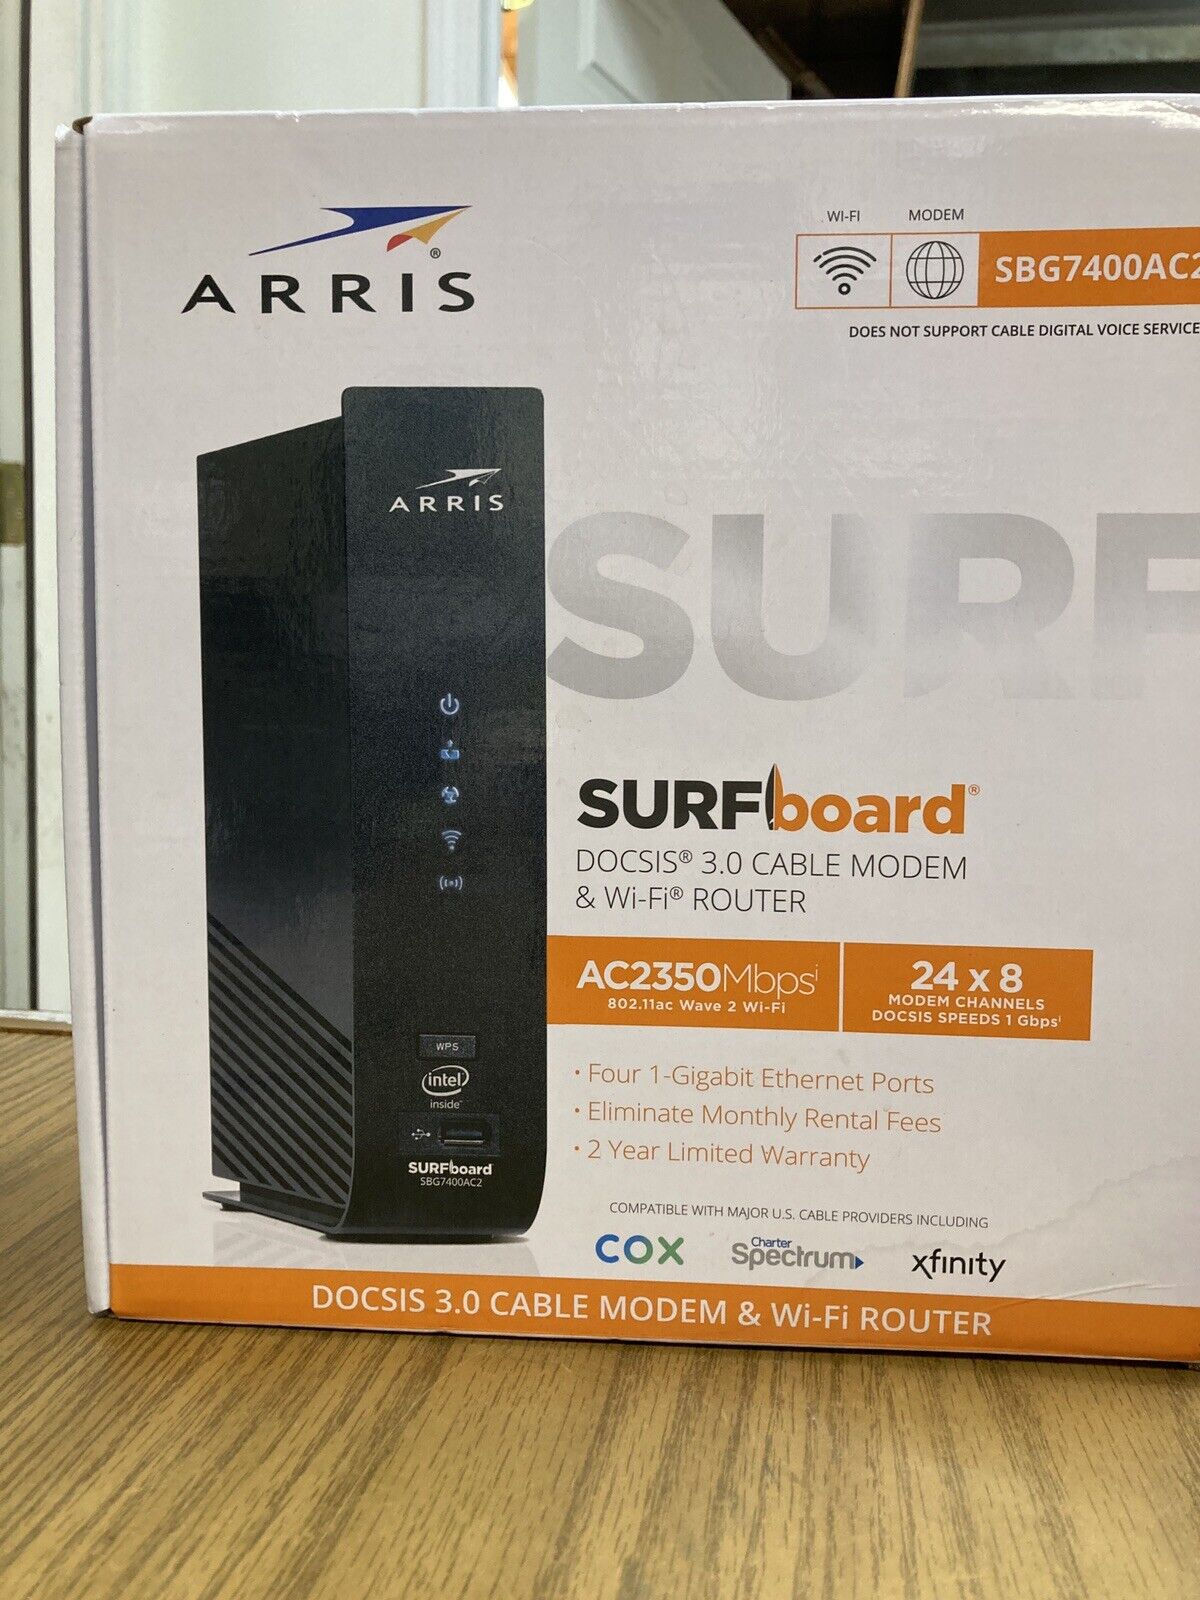 ARRIS SURFboard DOCSIS 3.0 Cable Modem WiFi internet Router McAfee SBG7400AC2 